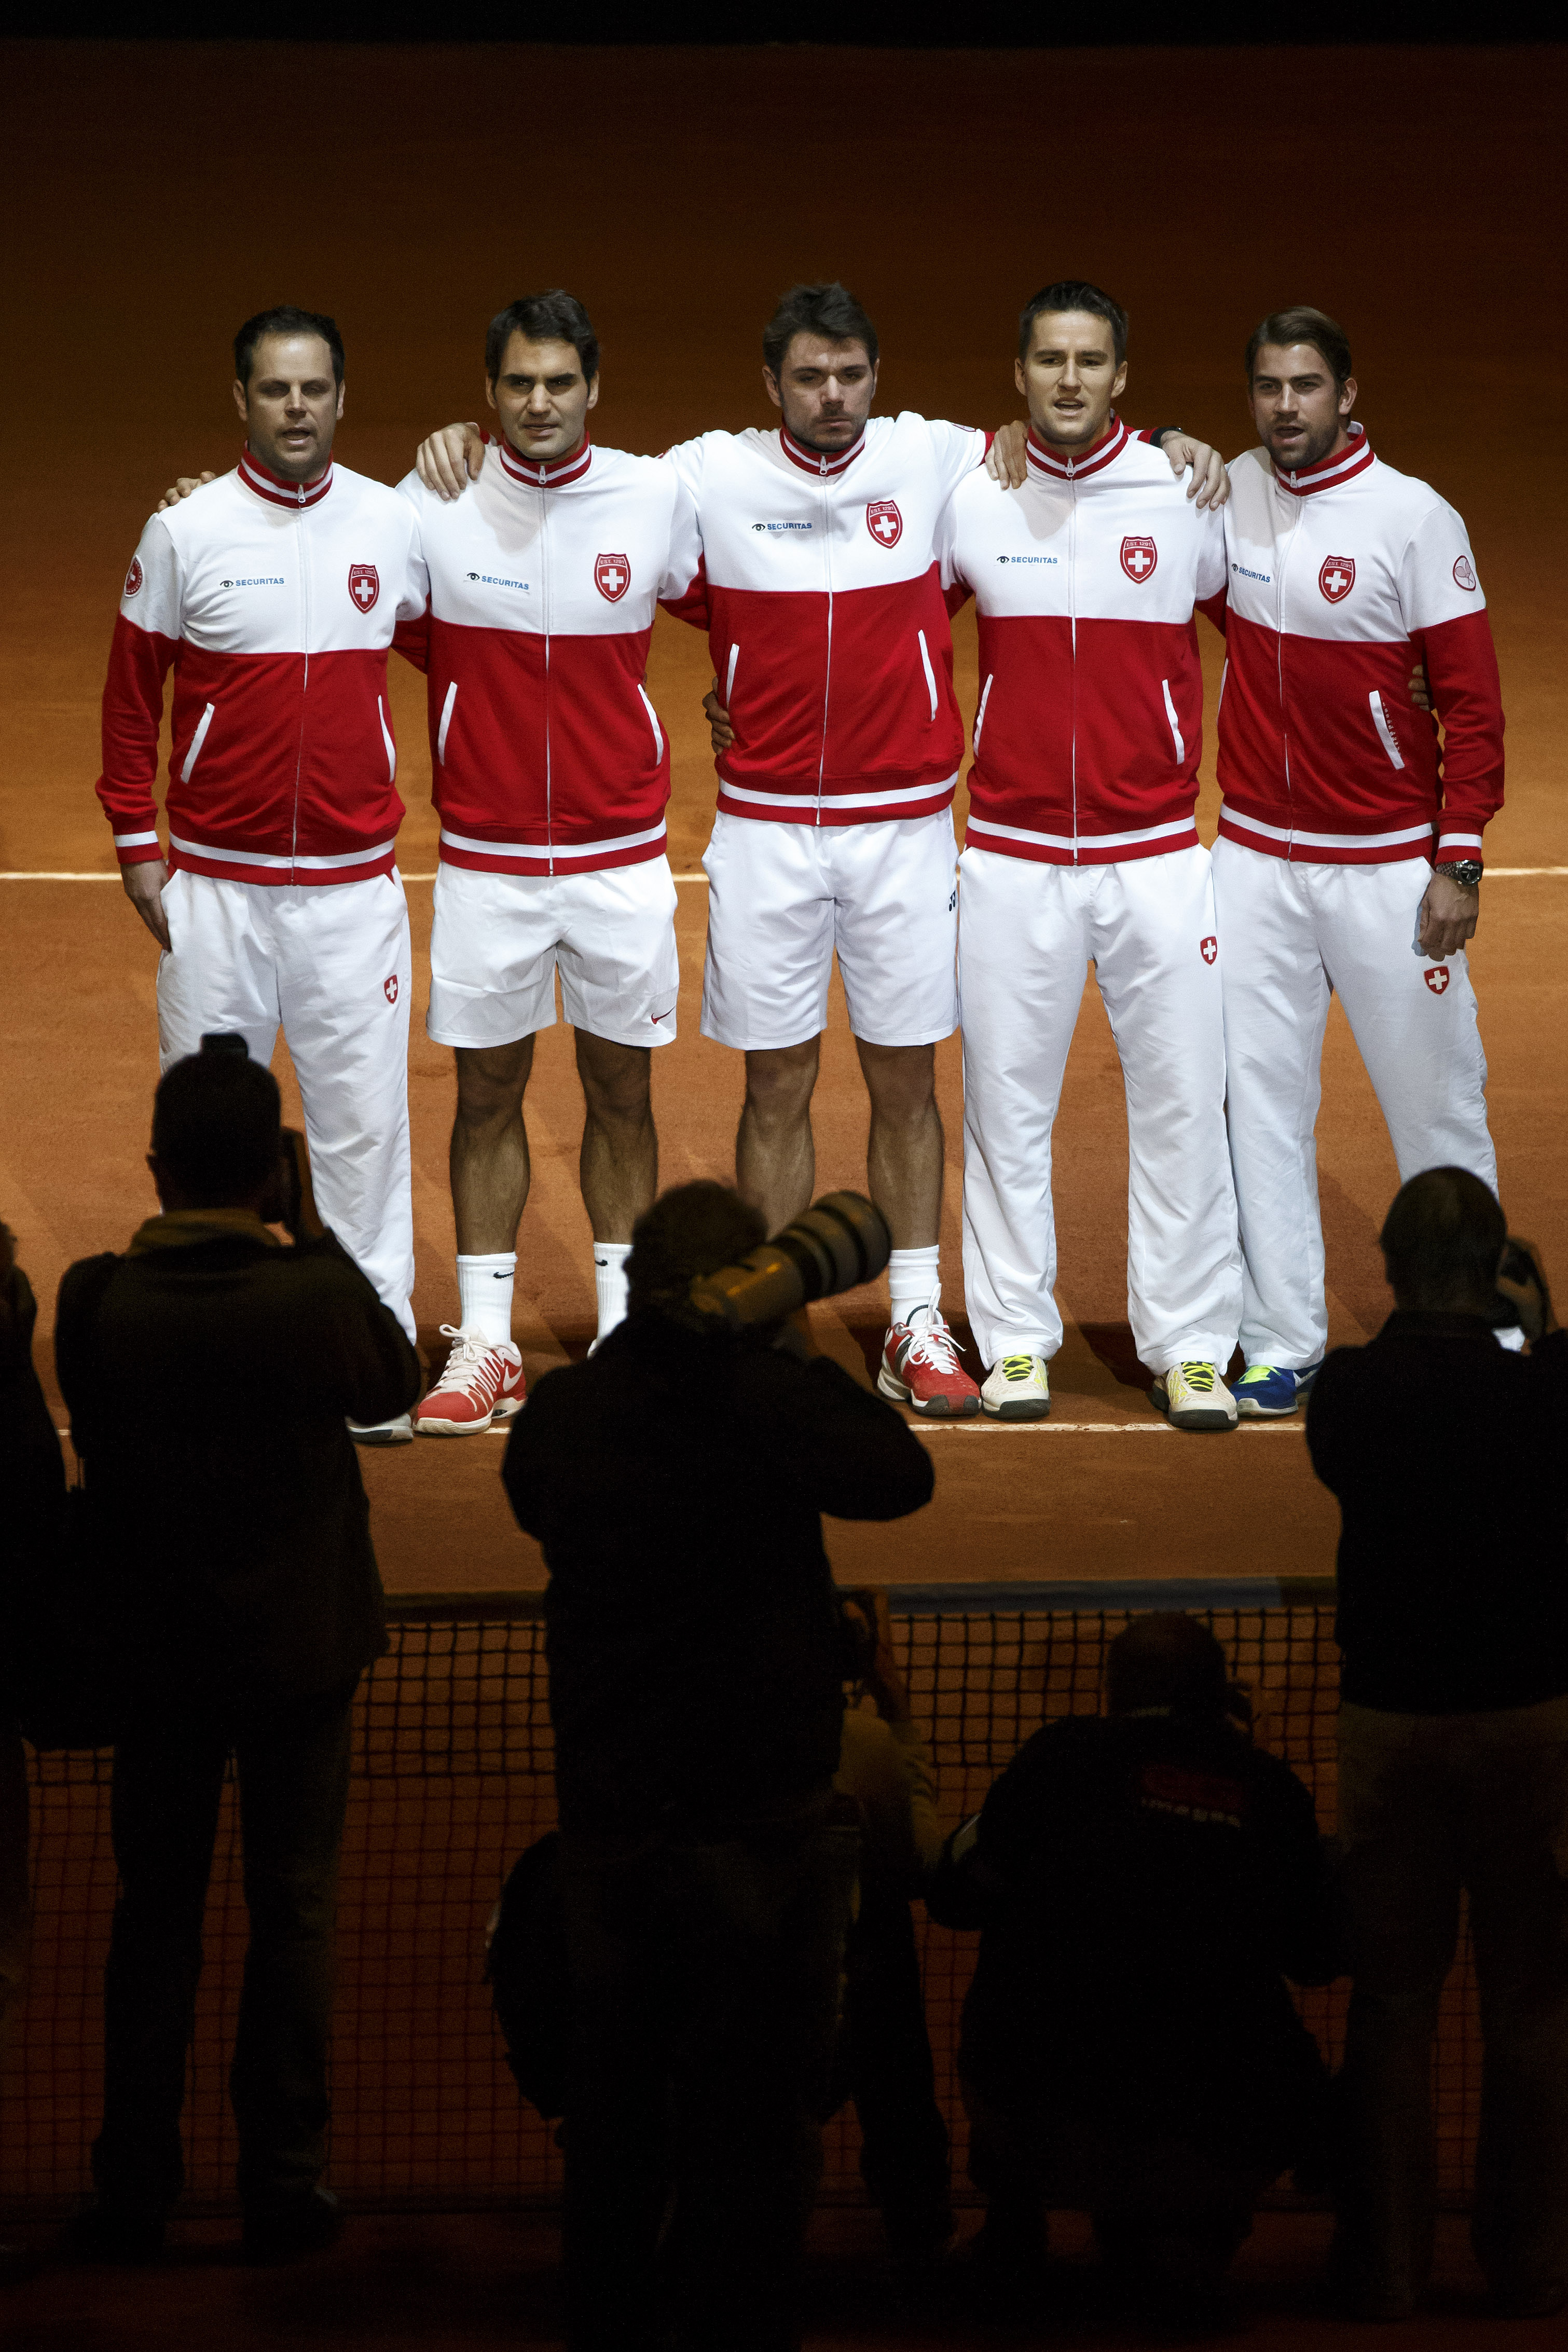 Swiss Davis Cup Team: from left to right, Swiss Davis Cup Team captain Severin Luethi, Roger Federer, Stan Wawrinka, Marco Chiudinelli, Michael Lammer, sing the Swiss anthem, during the ceremony prior the double match of the Davis Cup Final between France and Switzerland, at the Stadium Pierre Mauroy in Lille, France, Saturday, November 22, 2014. (KEYSTONE/Salvatore Di Nolfi)